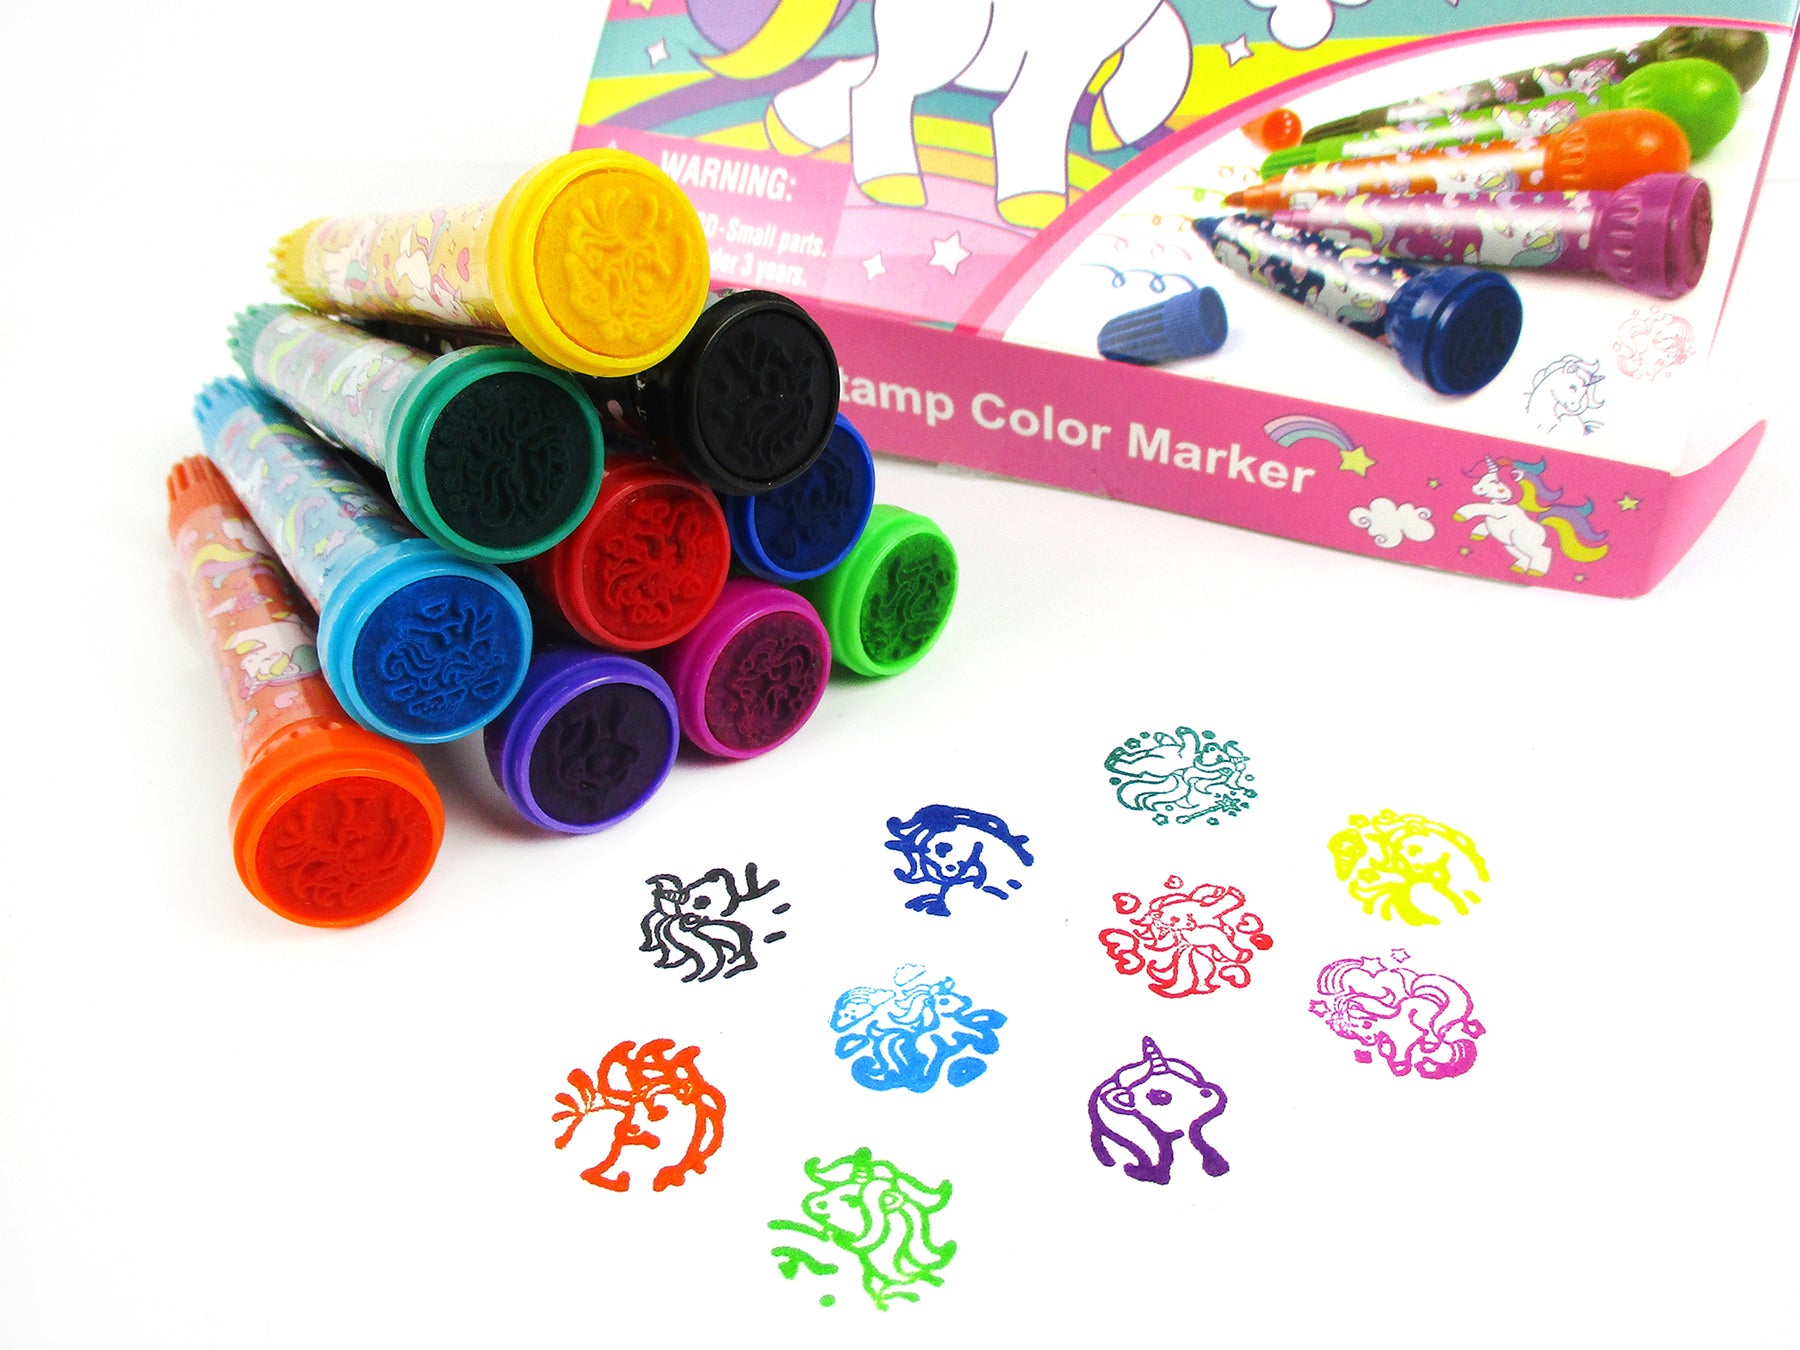 Stamp Markers by Gift Republic